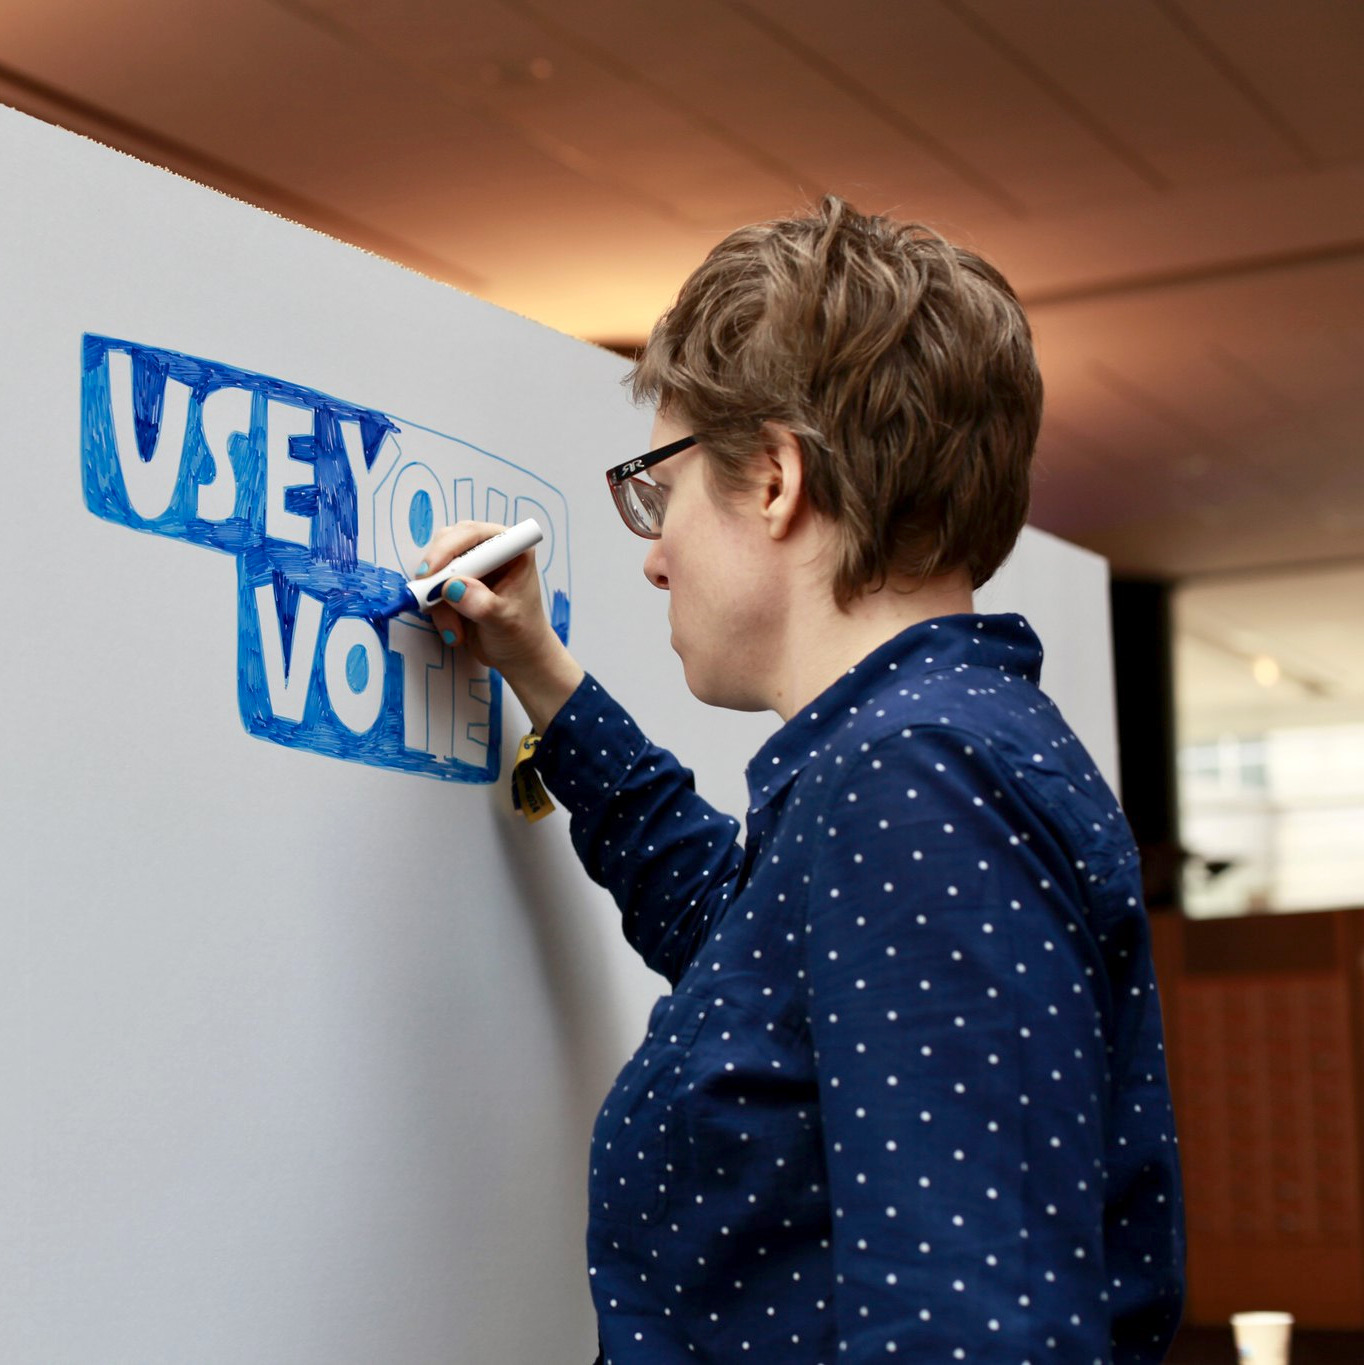 Image of a person writing on a board.